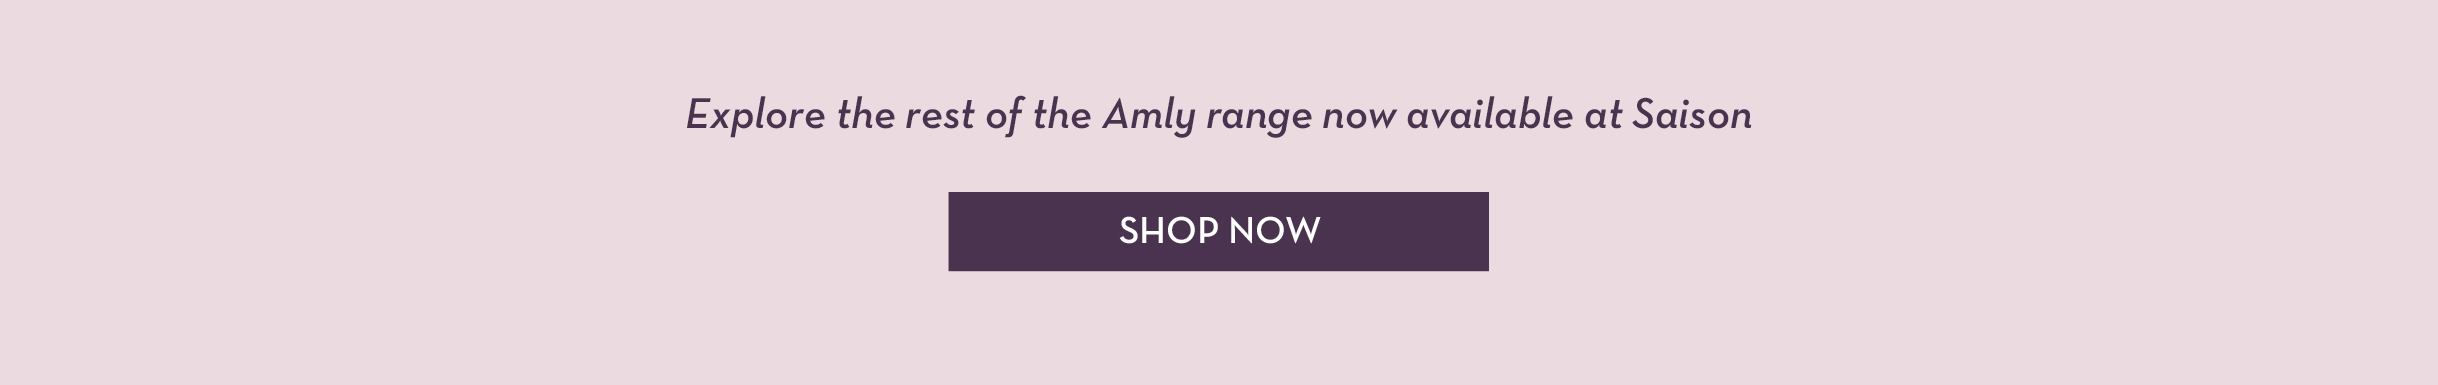 Explore the rest of the Amly range now available at Saison